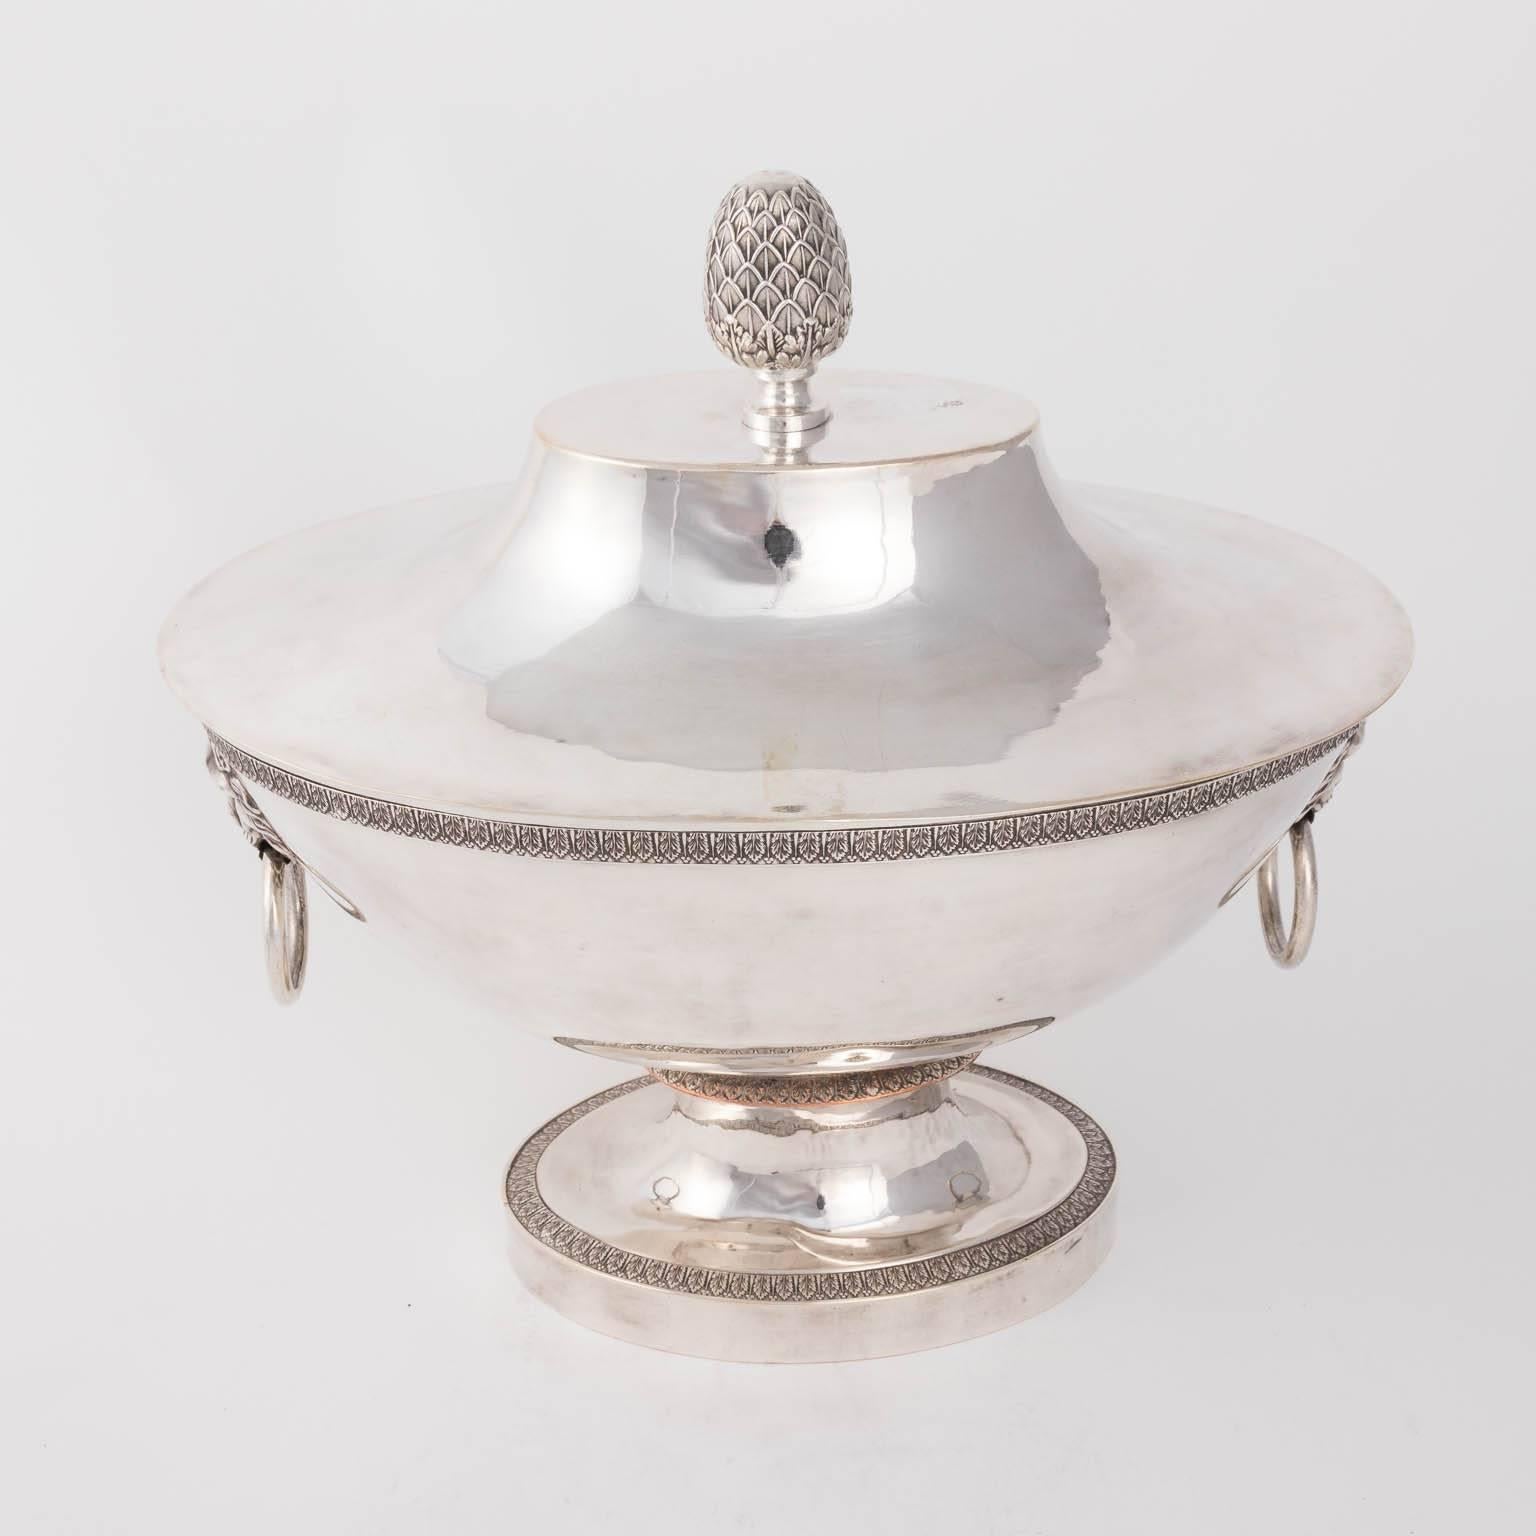 English silver plated tureen with an urn shaped lid and two handles, circa 1900. Makers mark on the bottom listed as